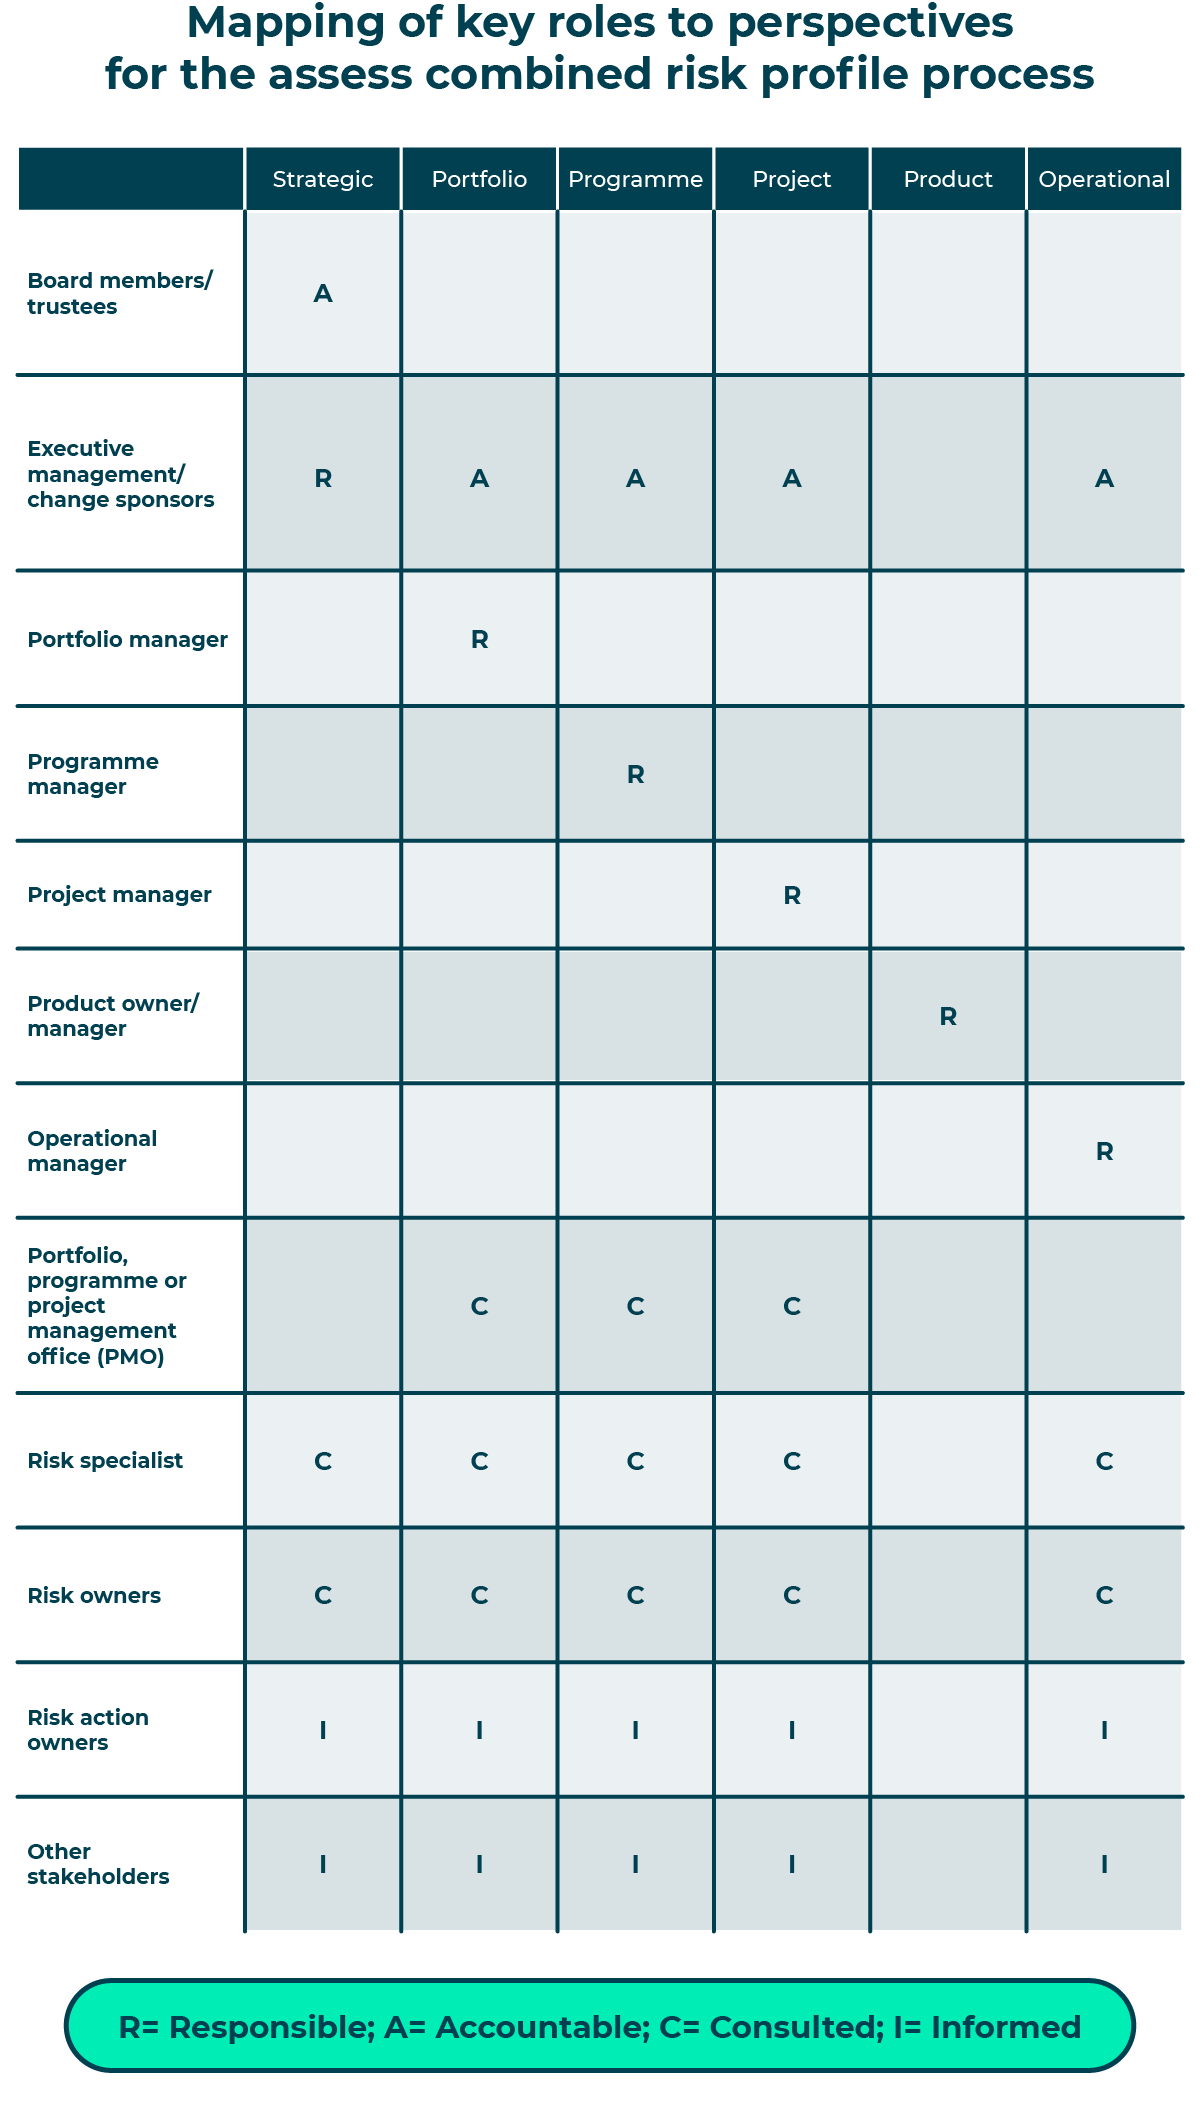 RACI diagram. It presents a list of key roles in the first column followed by the six perspectives, each in a separate column containing involvement indicators.